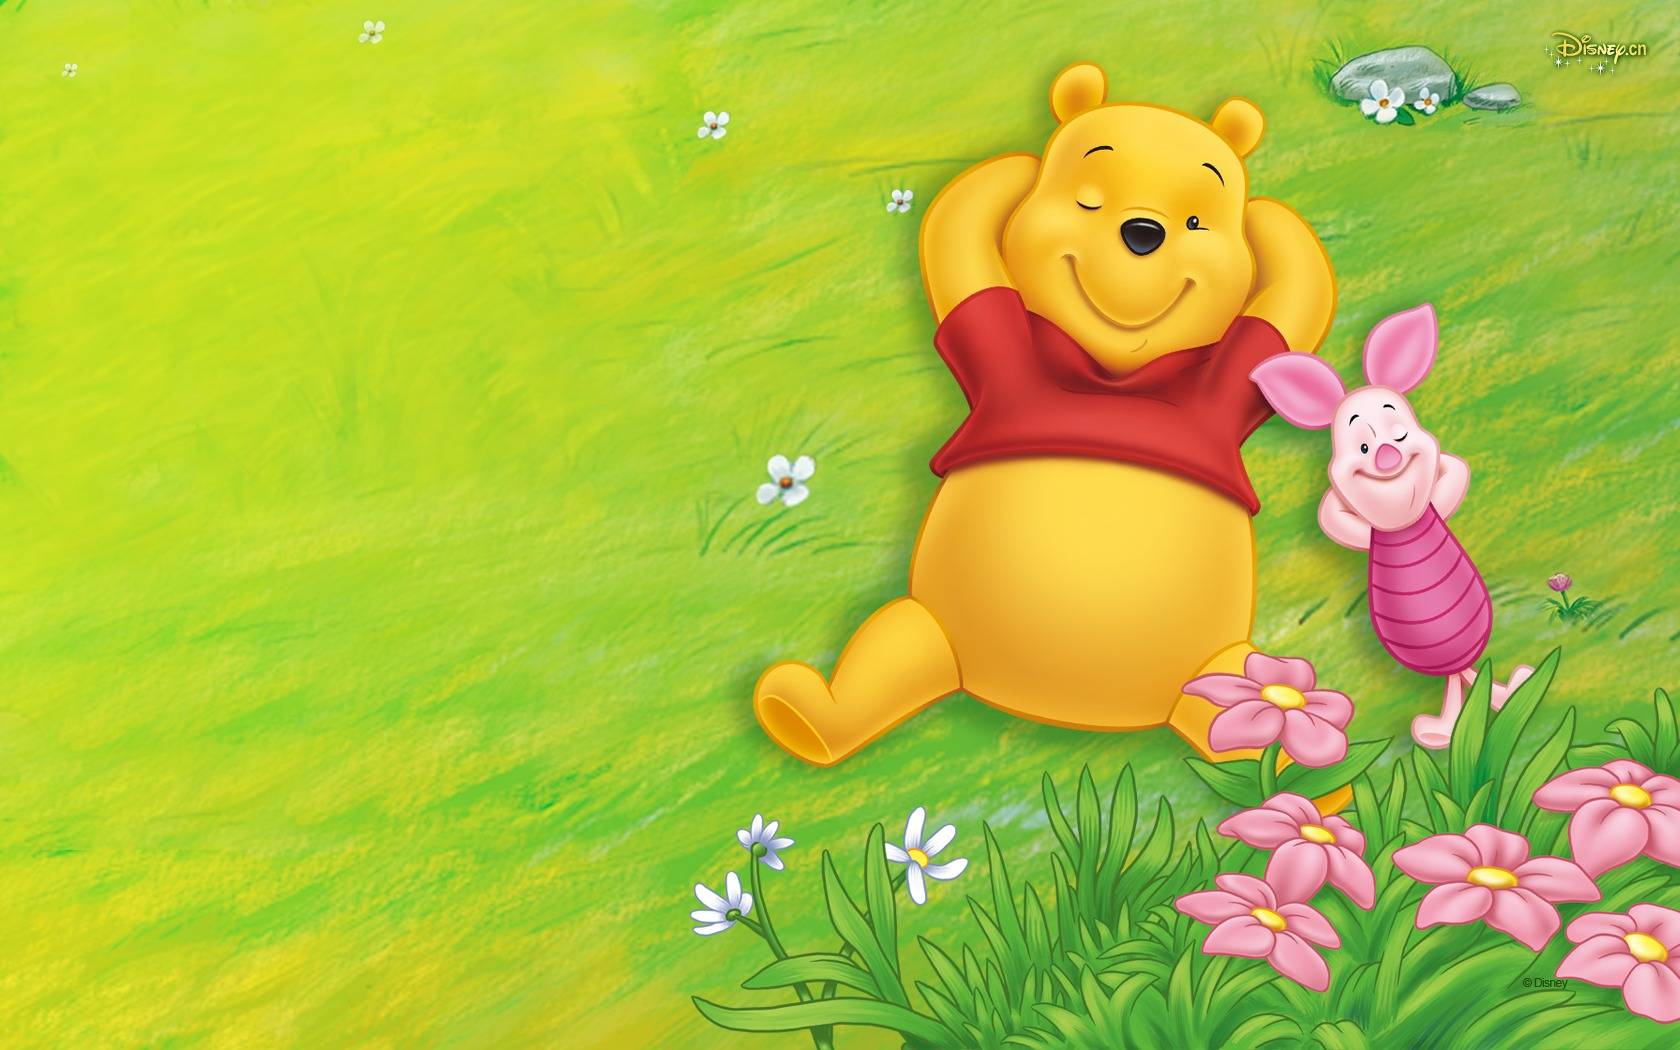 Image About Winnie The Pooh BirtHDay